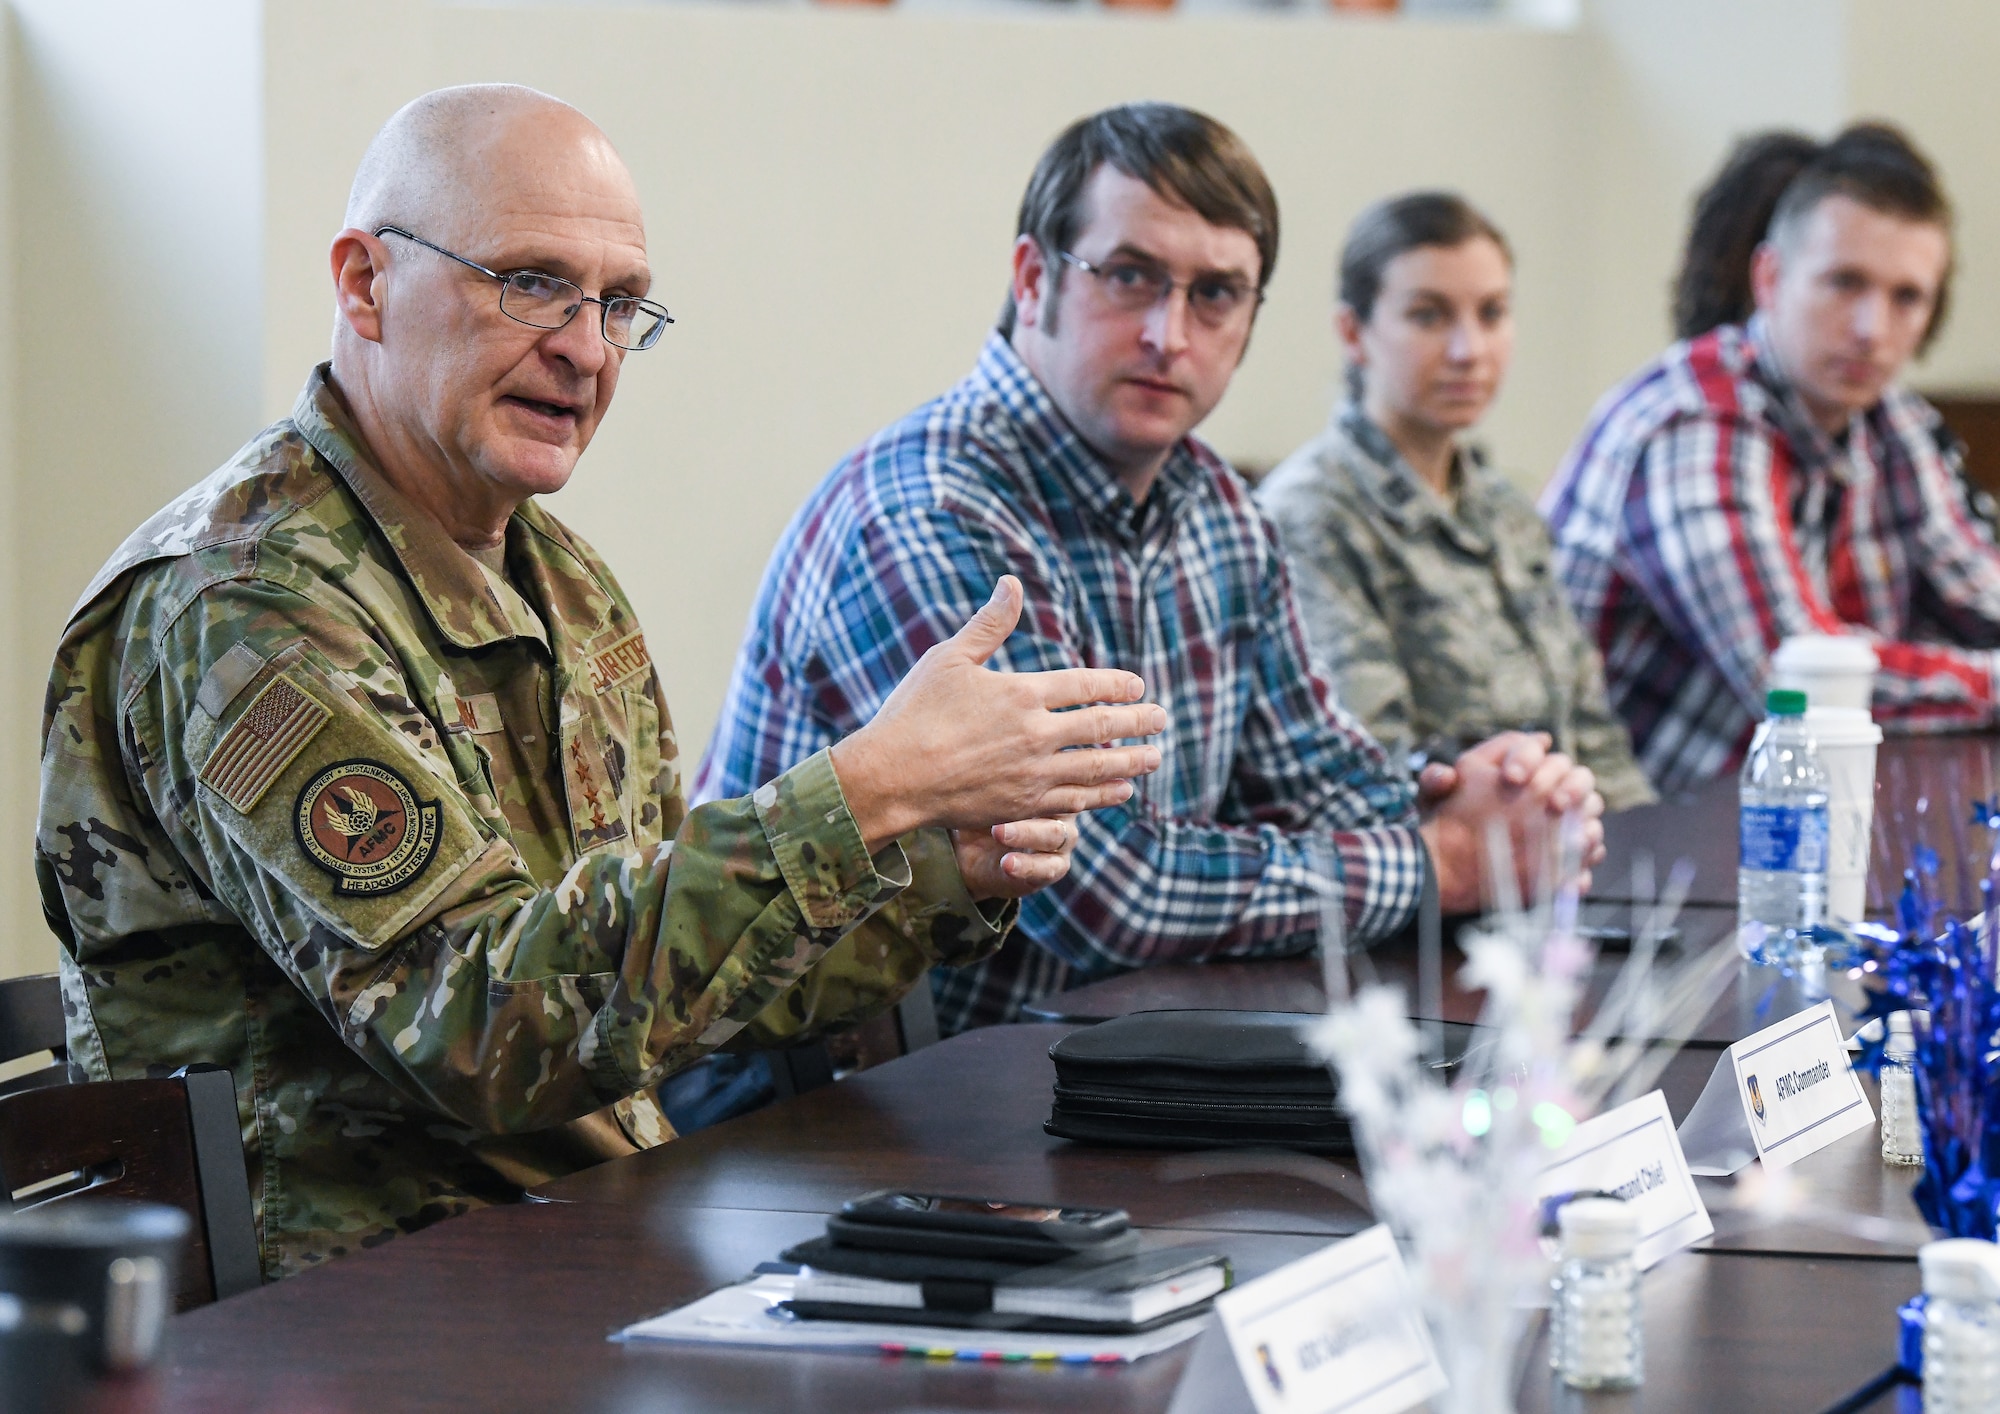 Gen. Arnold W. Bunch, Jr., commander, Air Force Materiel Command, fields questions during a breakfast with Arnold Engineering Development Complex team members, Feb. 7, 2020, at Arnold Air Force Base, Tenn. (U.S. Air Force photo by Jill Pickett)